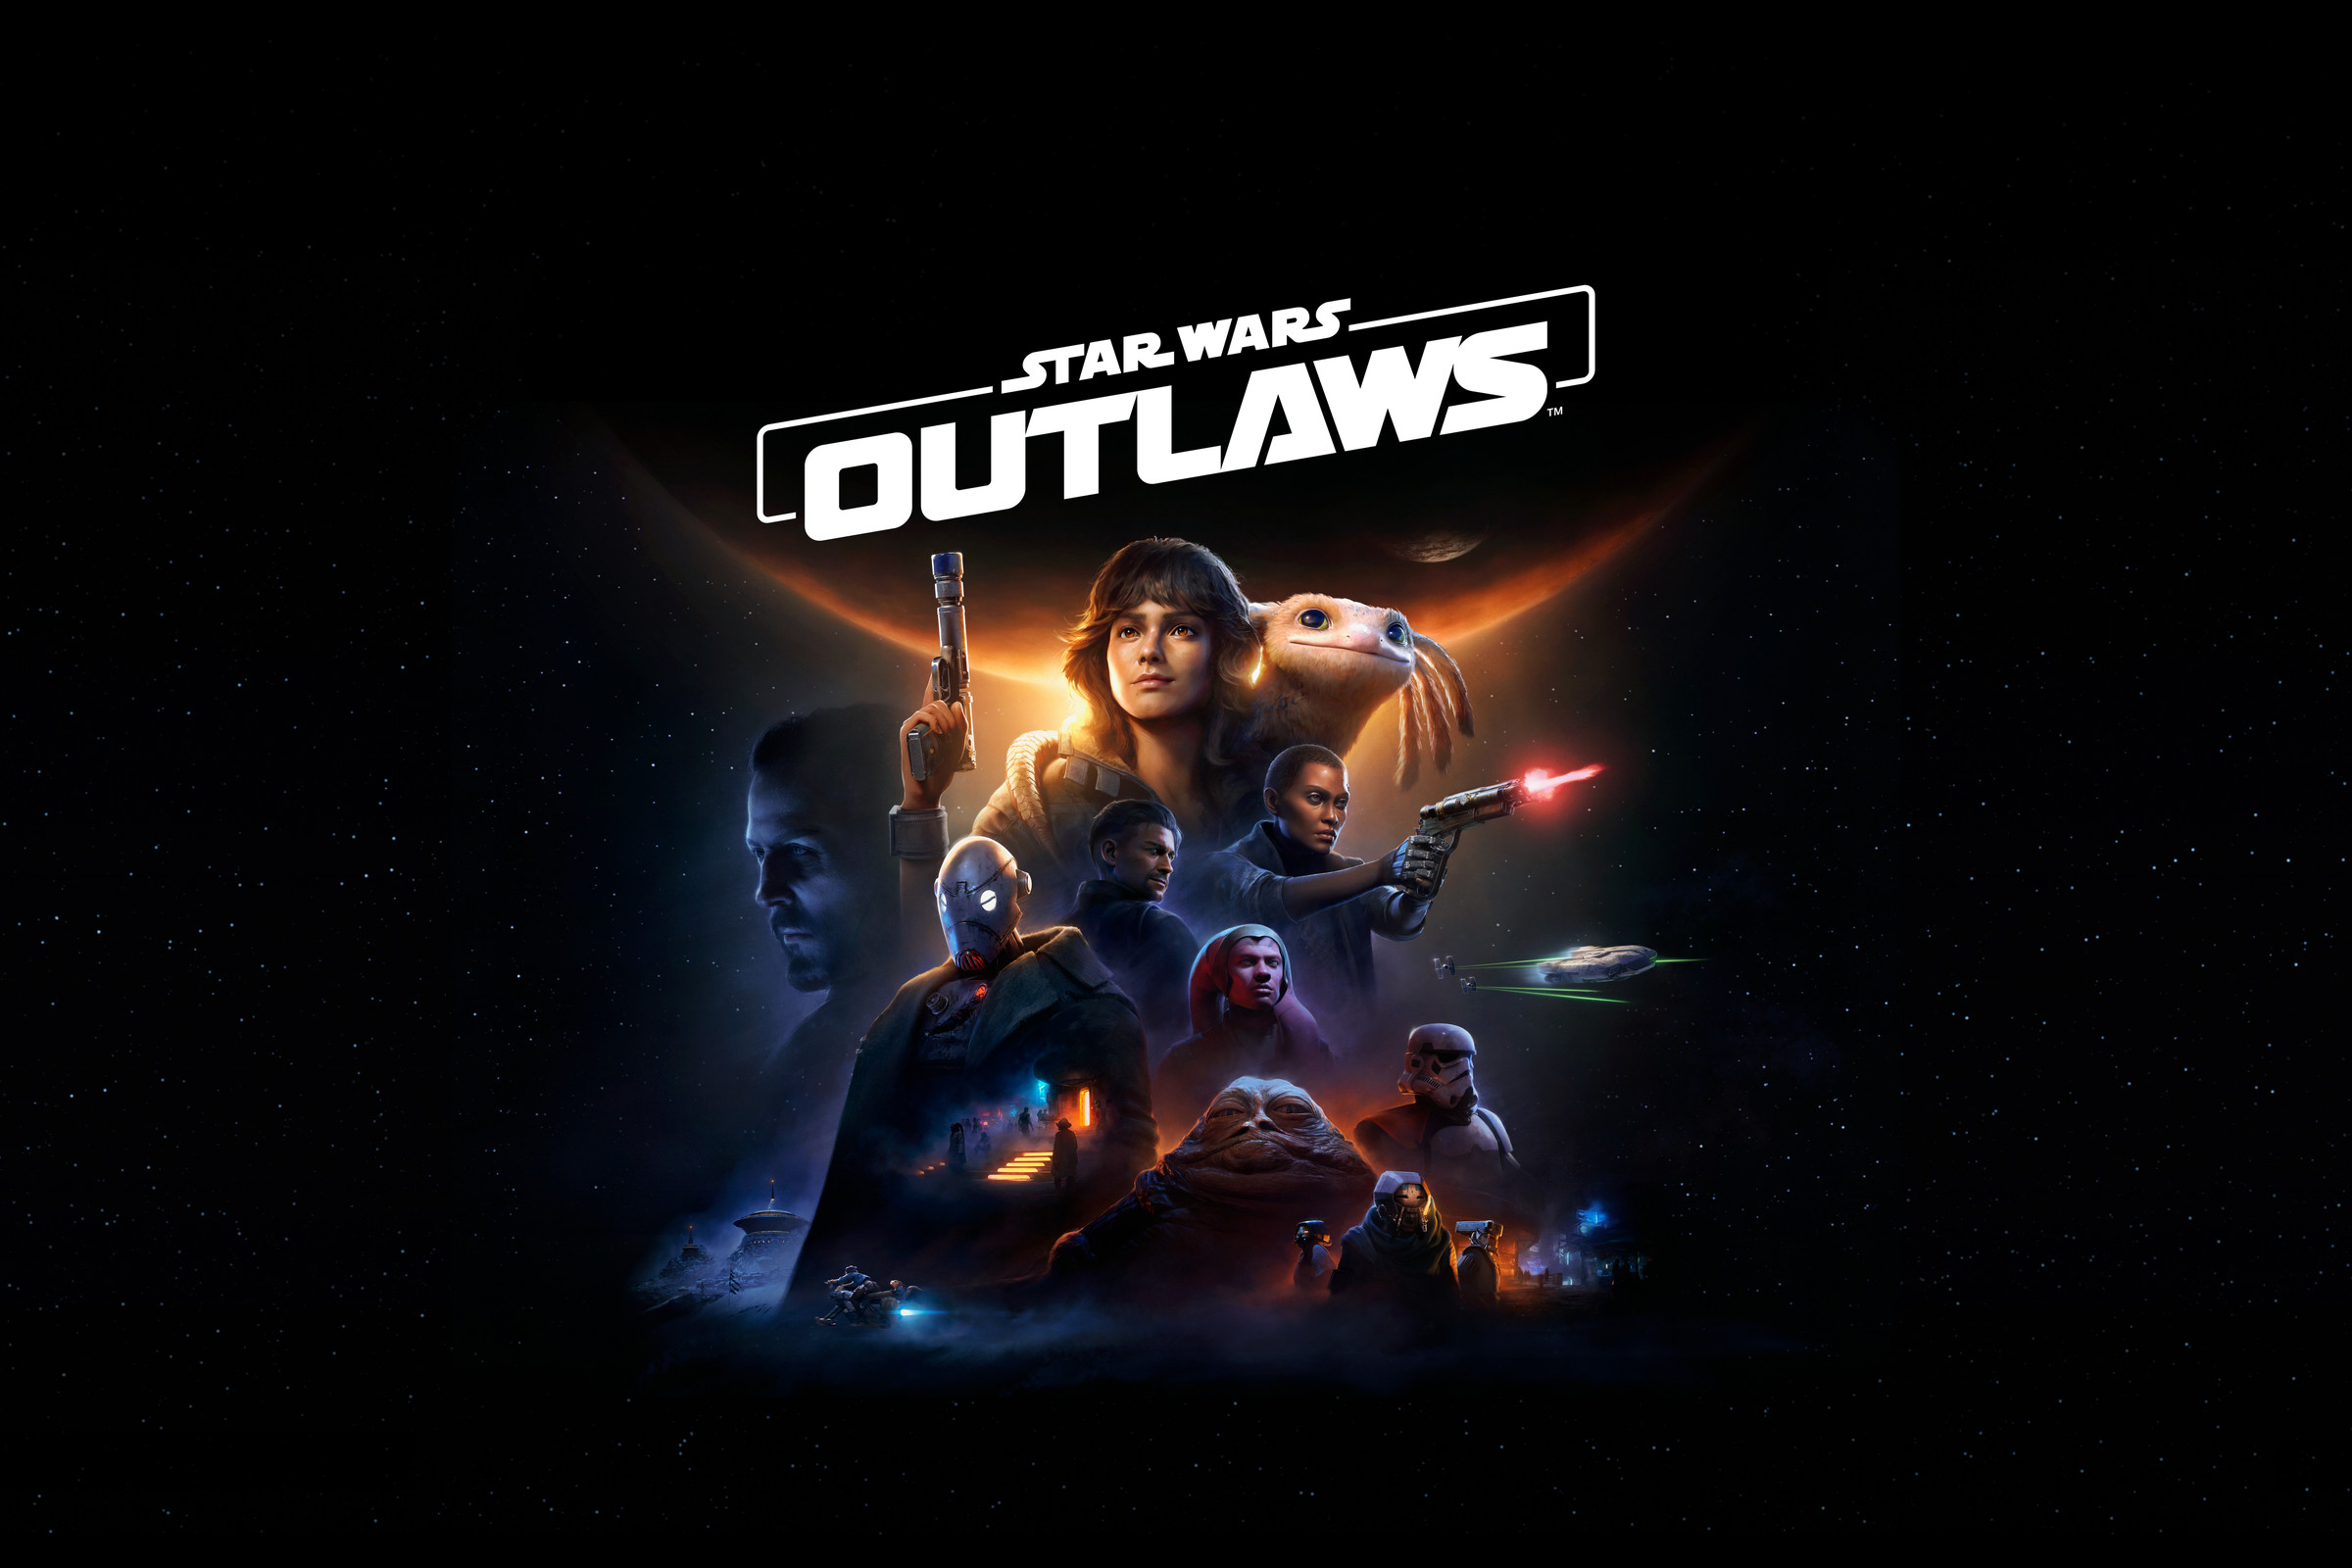 Promotional art for the video game Star Wars Outlaws.